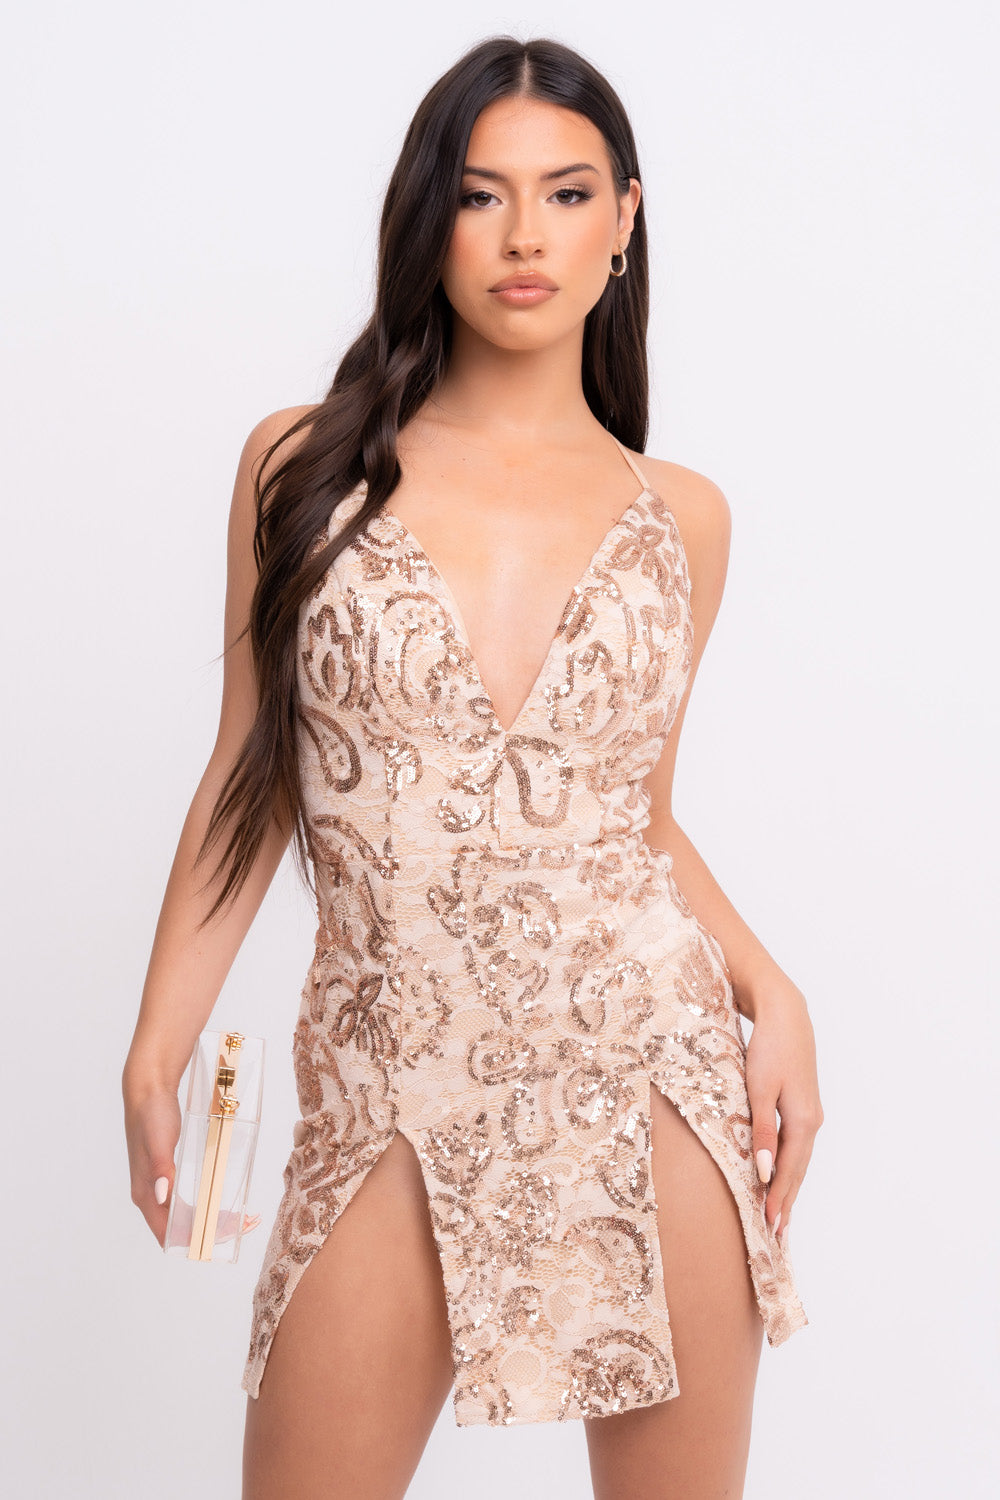 Invite Only Rose Gold Nude Plunge Lace Floral Sequin Double Thigh Slit Mini Dress